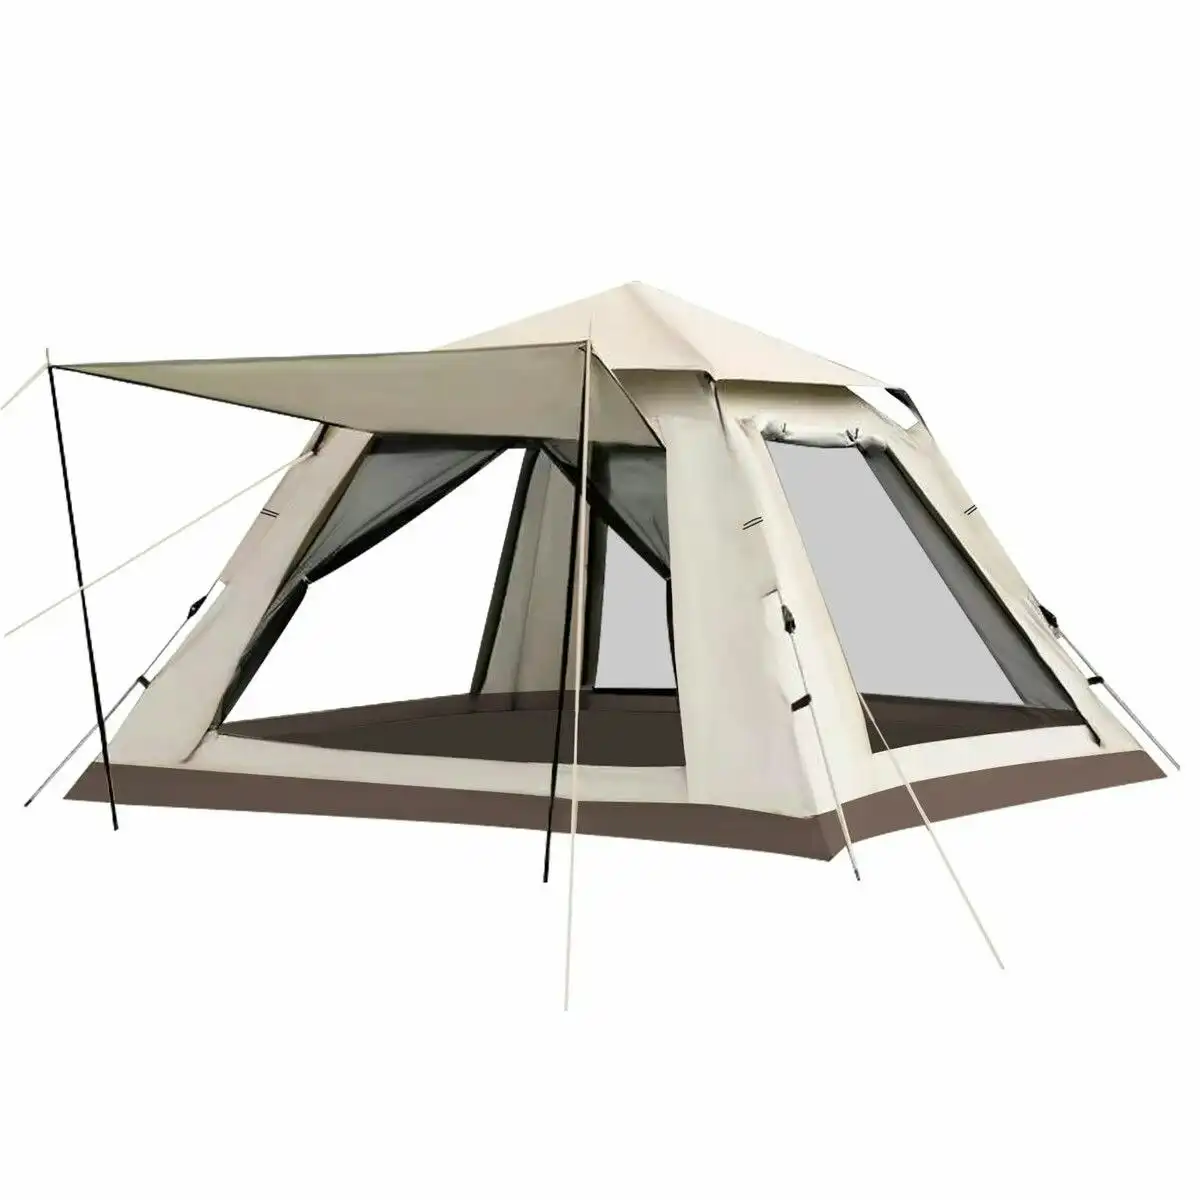 OGL  4 Person Tent Camping Instant Pop Up Family Beach Sun Shade Shelter Waterproof 240x240x160cm Creamy White